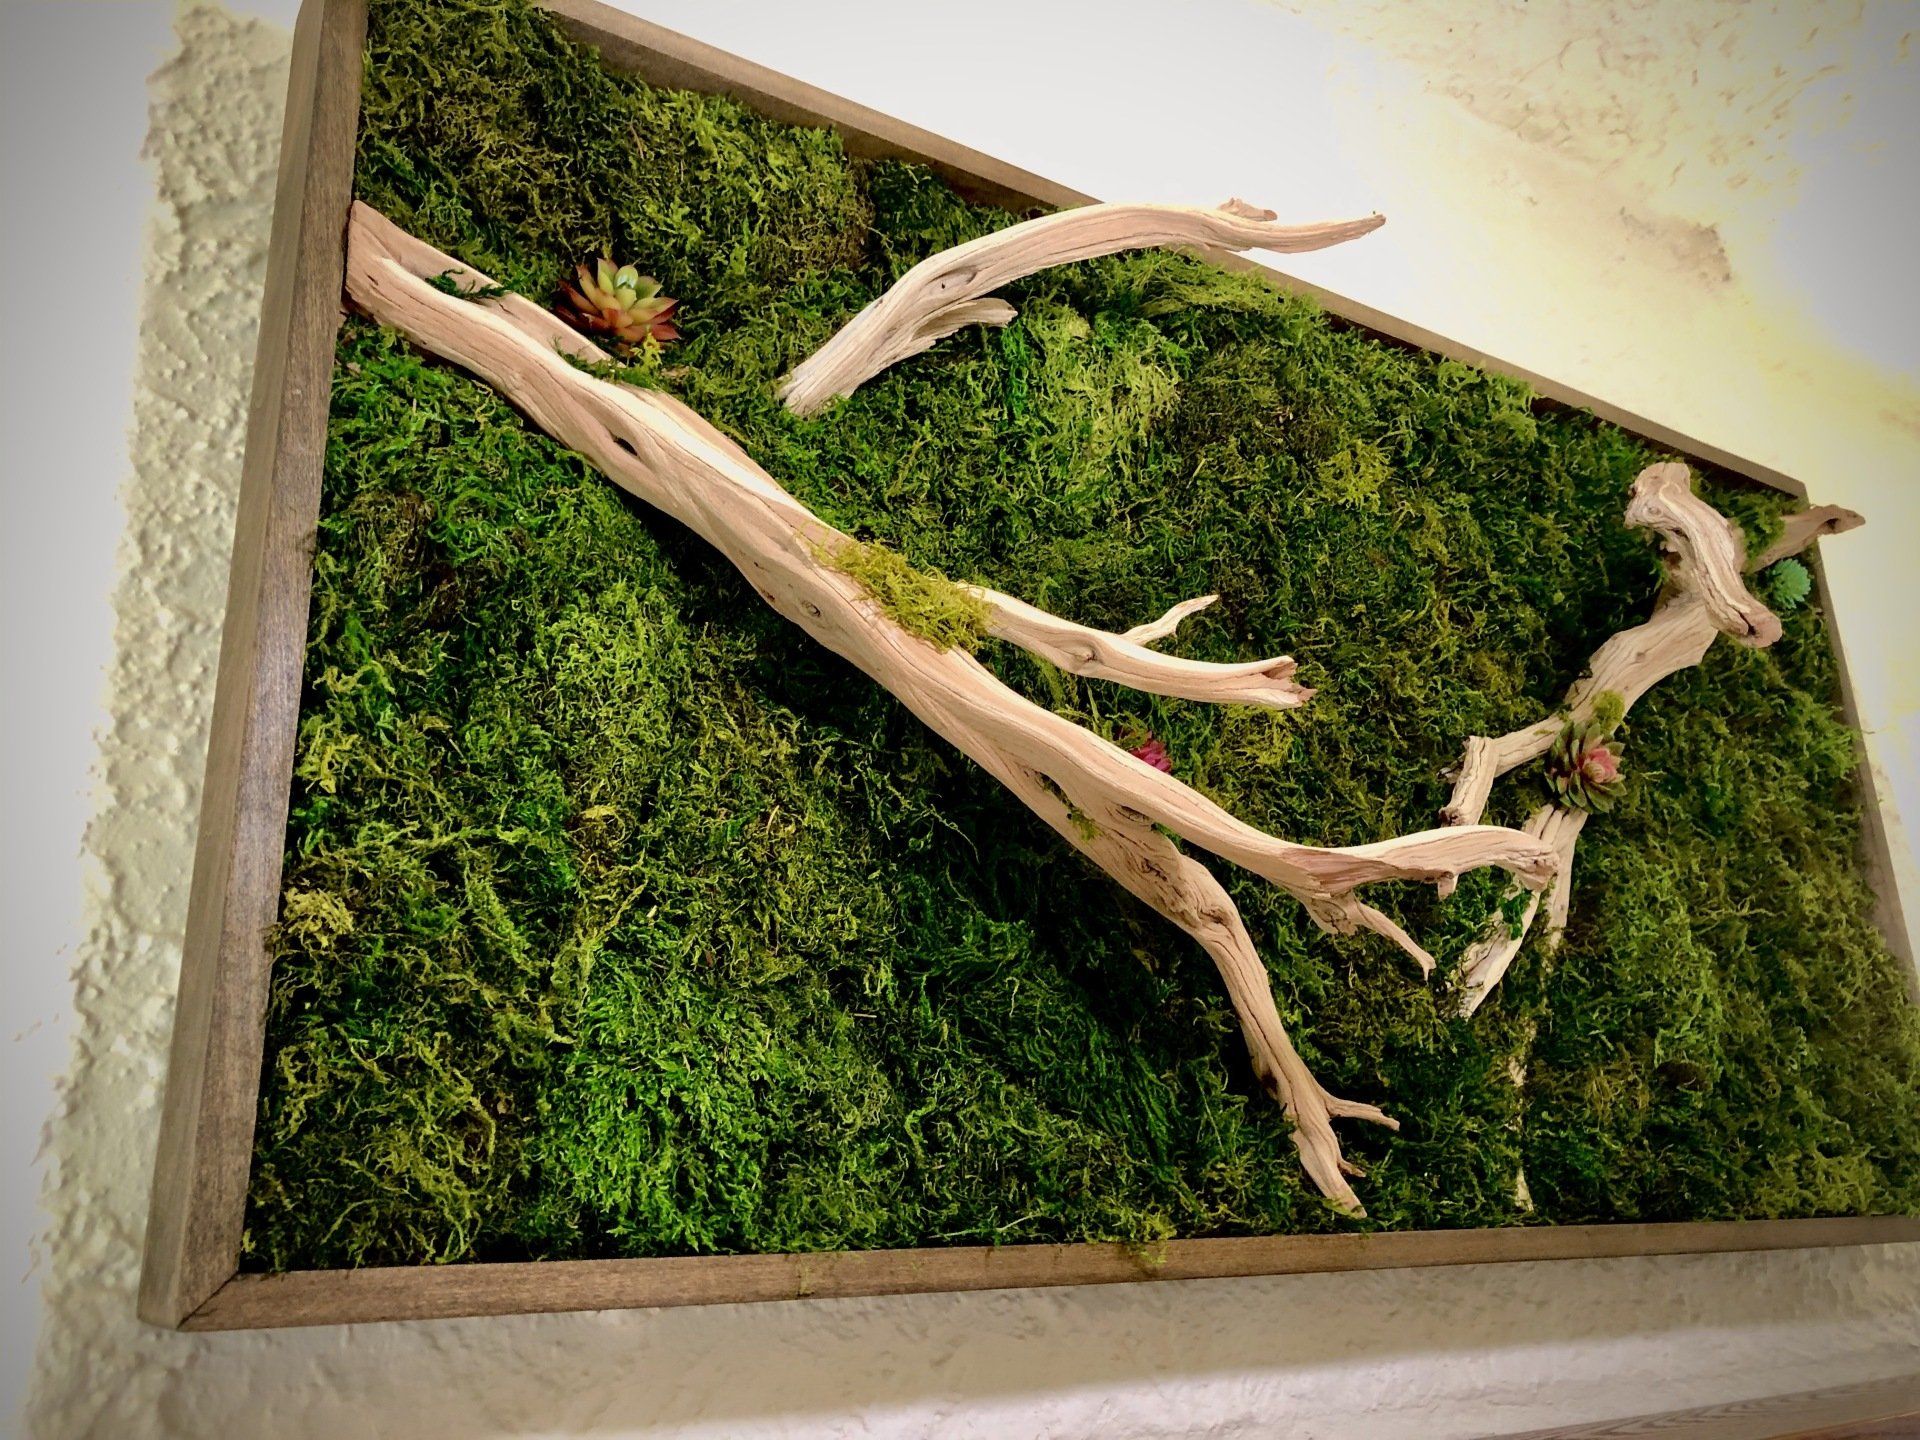 Right Brane Design and moss wall design and build